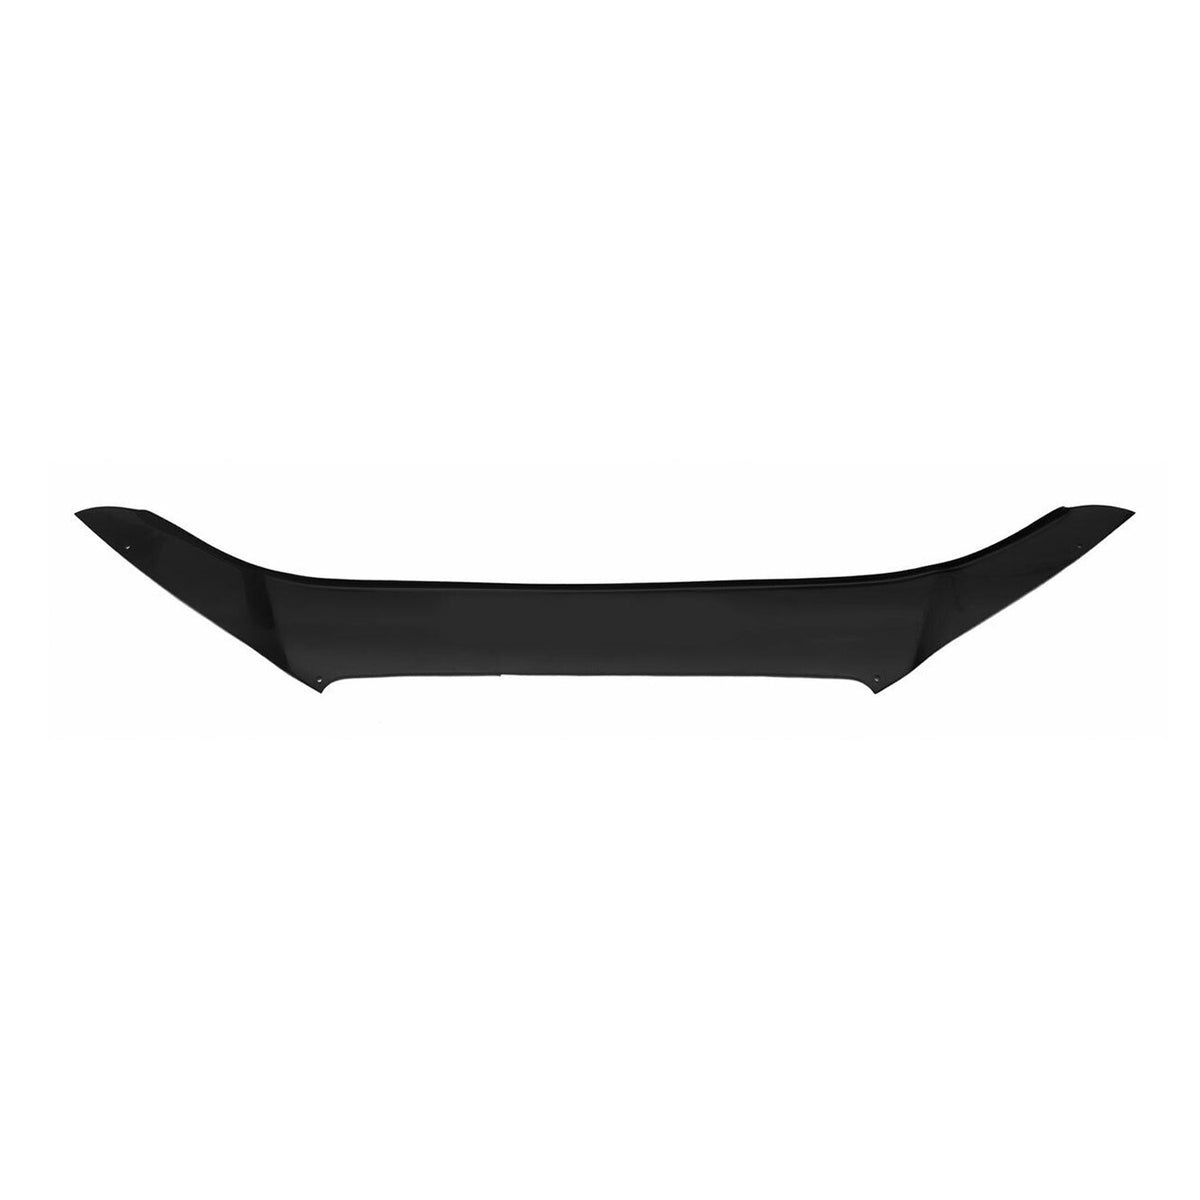 Bonnet deflector insect stone chip protection for Hyundai Getz 2002-11 dark